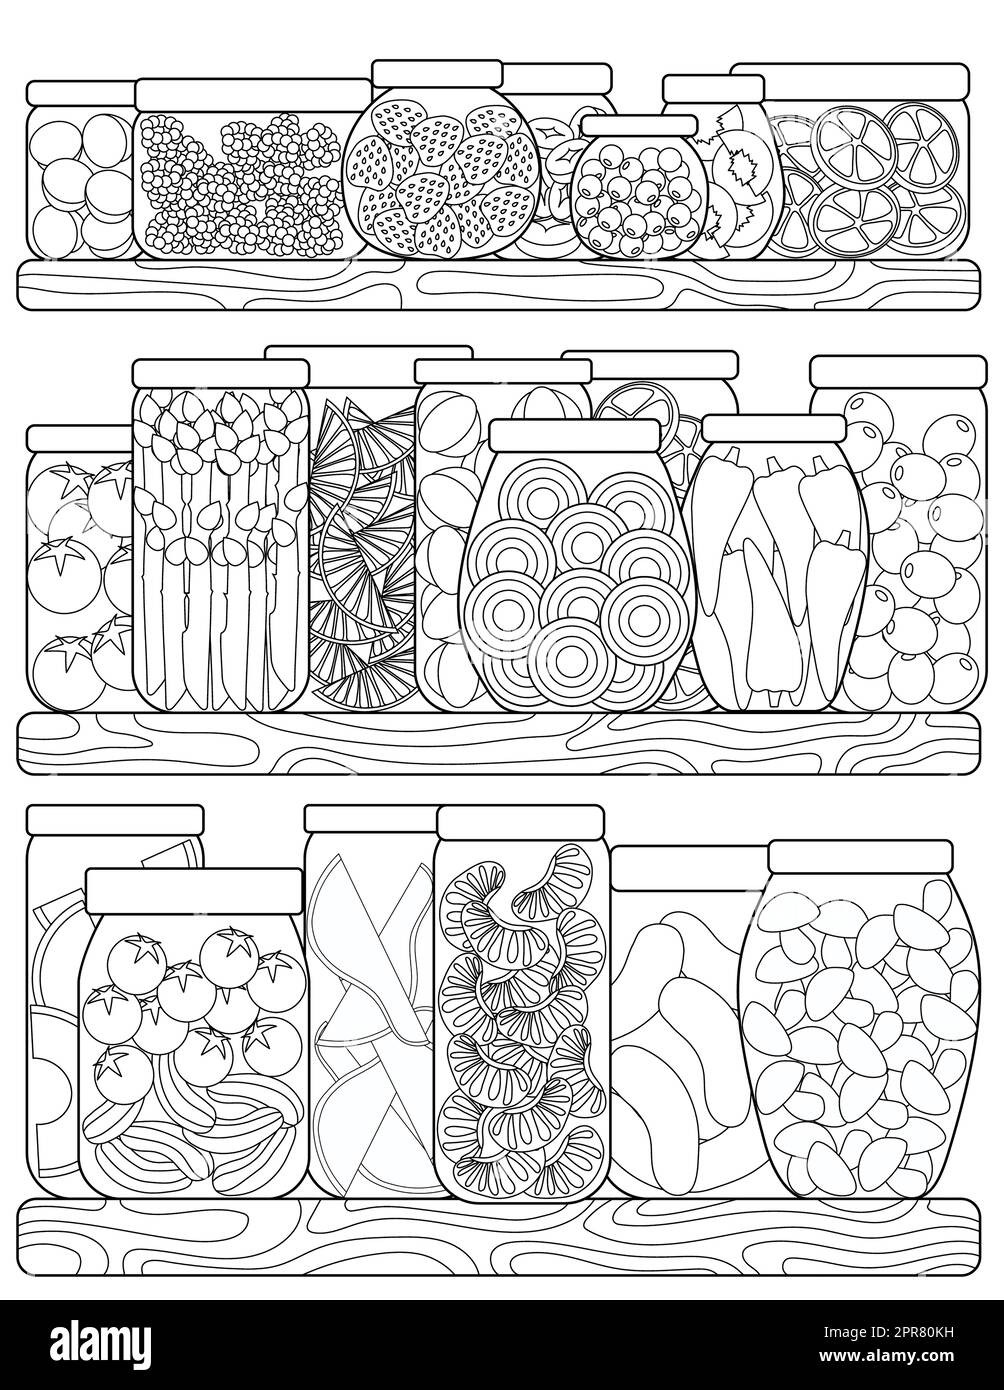 Free Printable Food Fruits Coloring Page for Adults and Kids